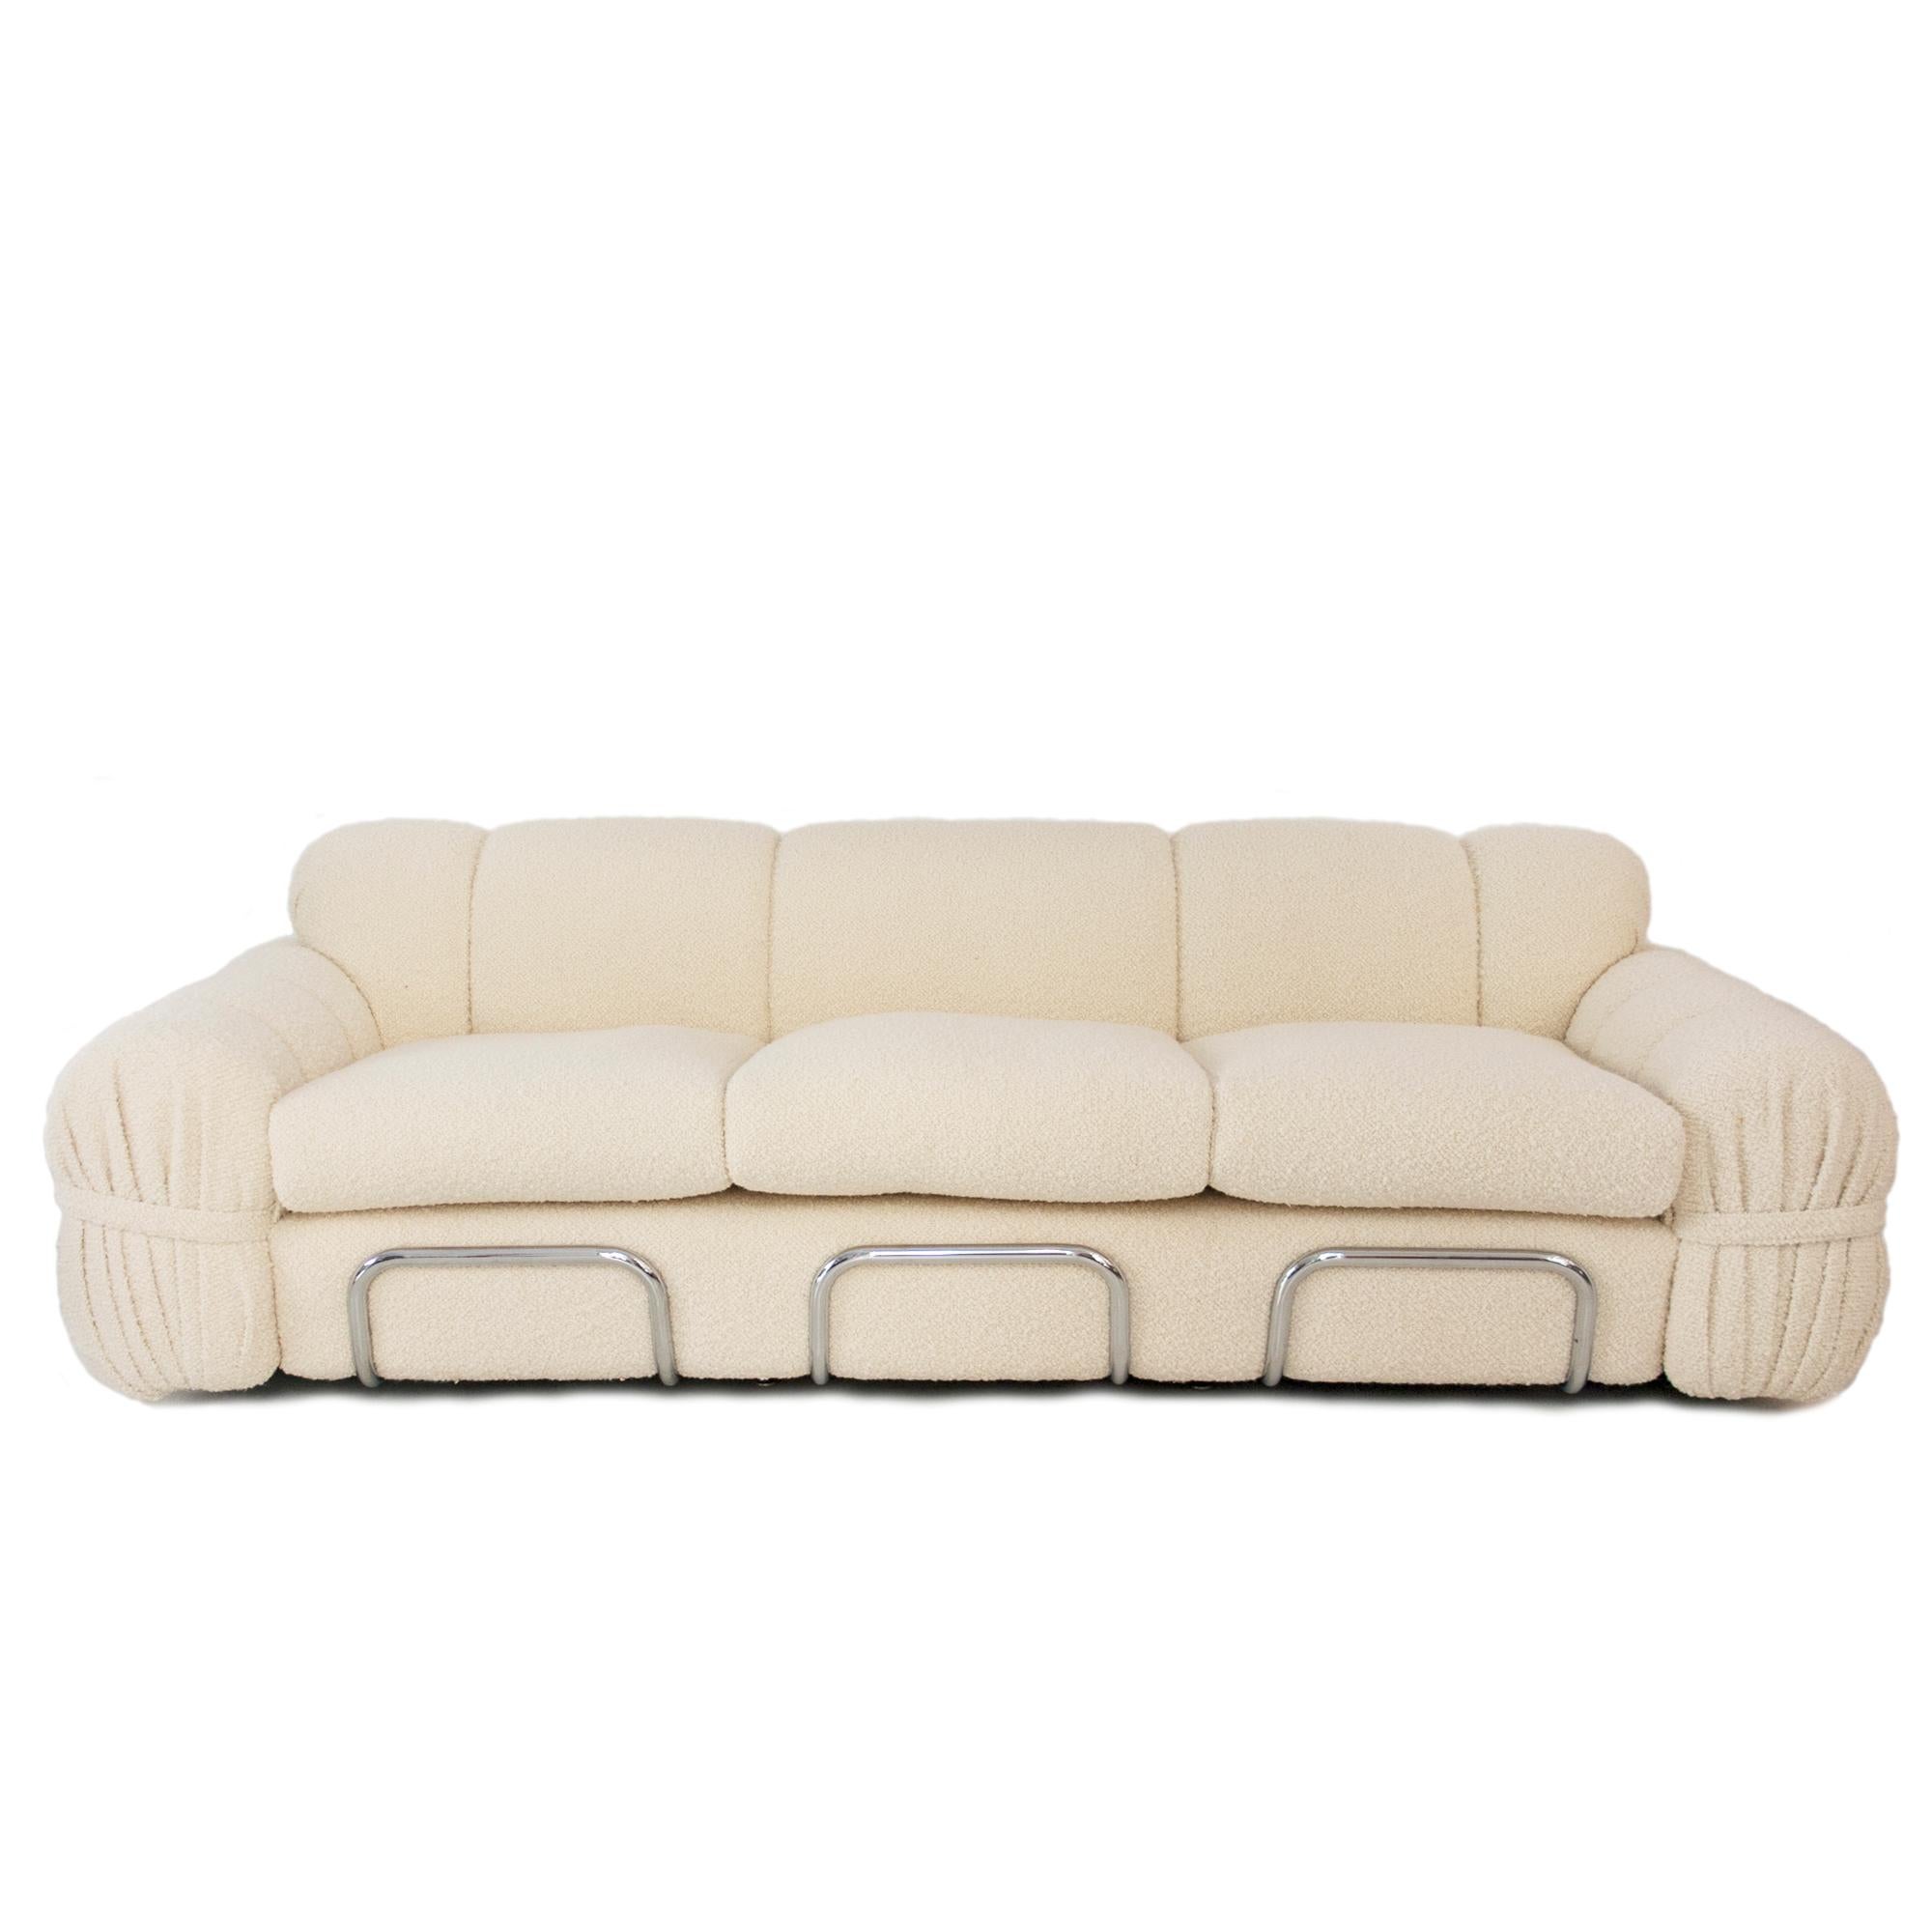 Modern sofa designed by italian designer and painter Adriano Piazzesi (1923 - 2009) in the 1970s. The sofa is supported by a curved steel structure that holds the 3 pax wood and foam body reupholstered in beige cotton bouclé.
 